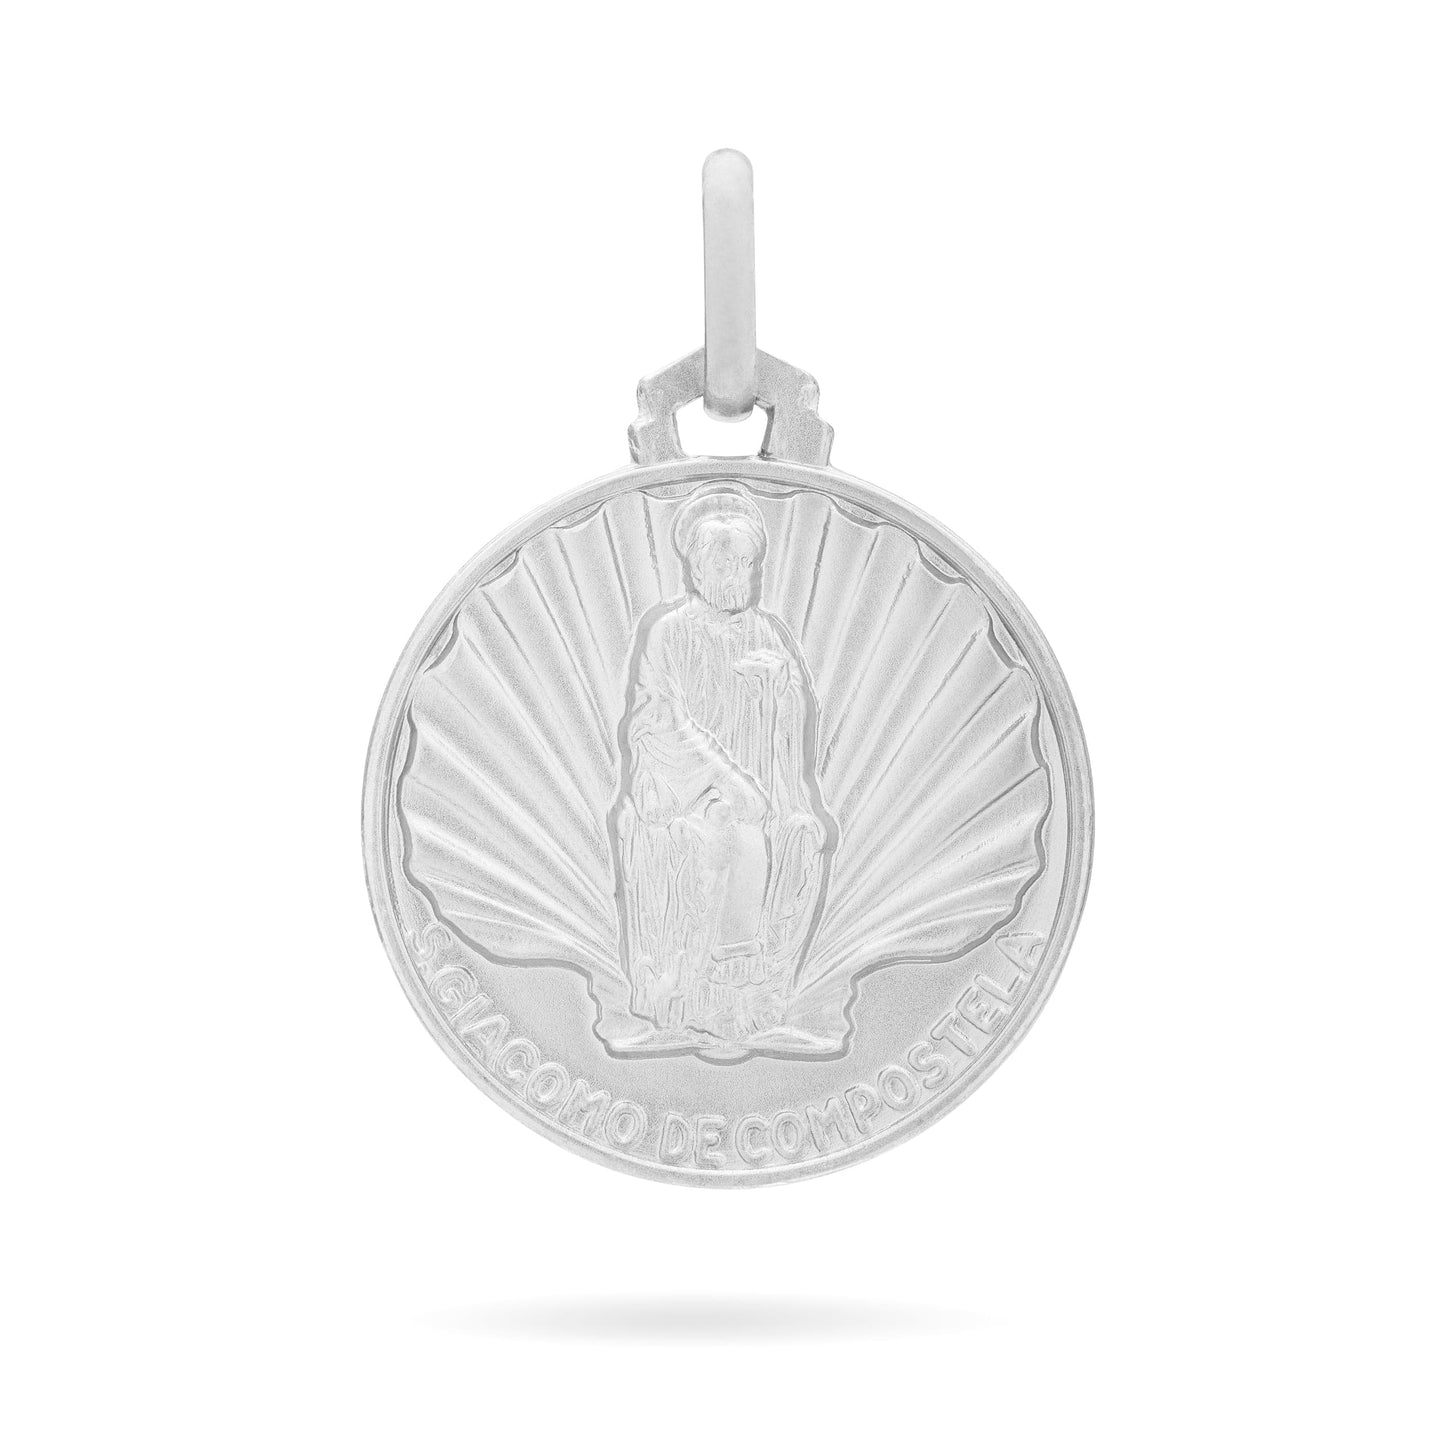 MONDO CATTOLICO Medal 10 mm (0.40 in) Sterling Silver Medal St. James of Campostela